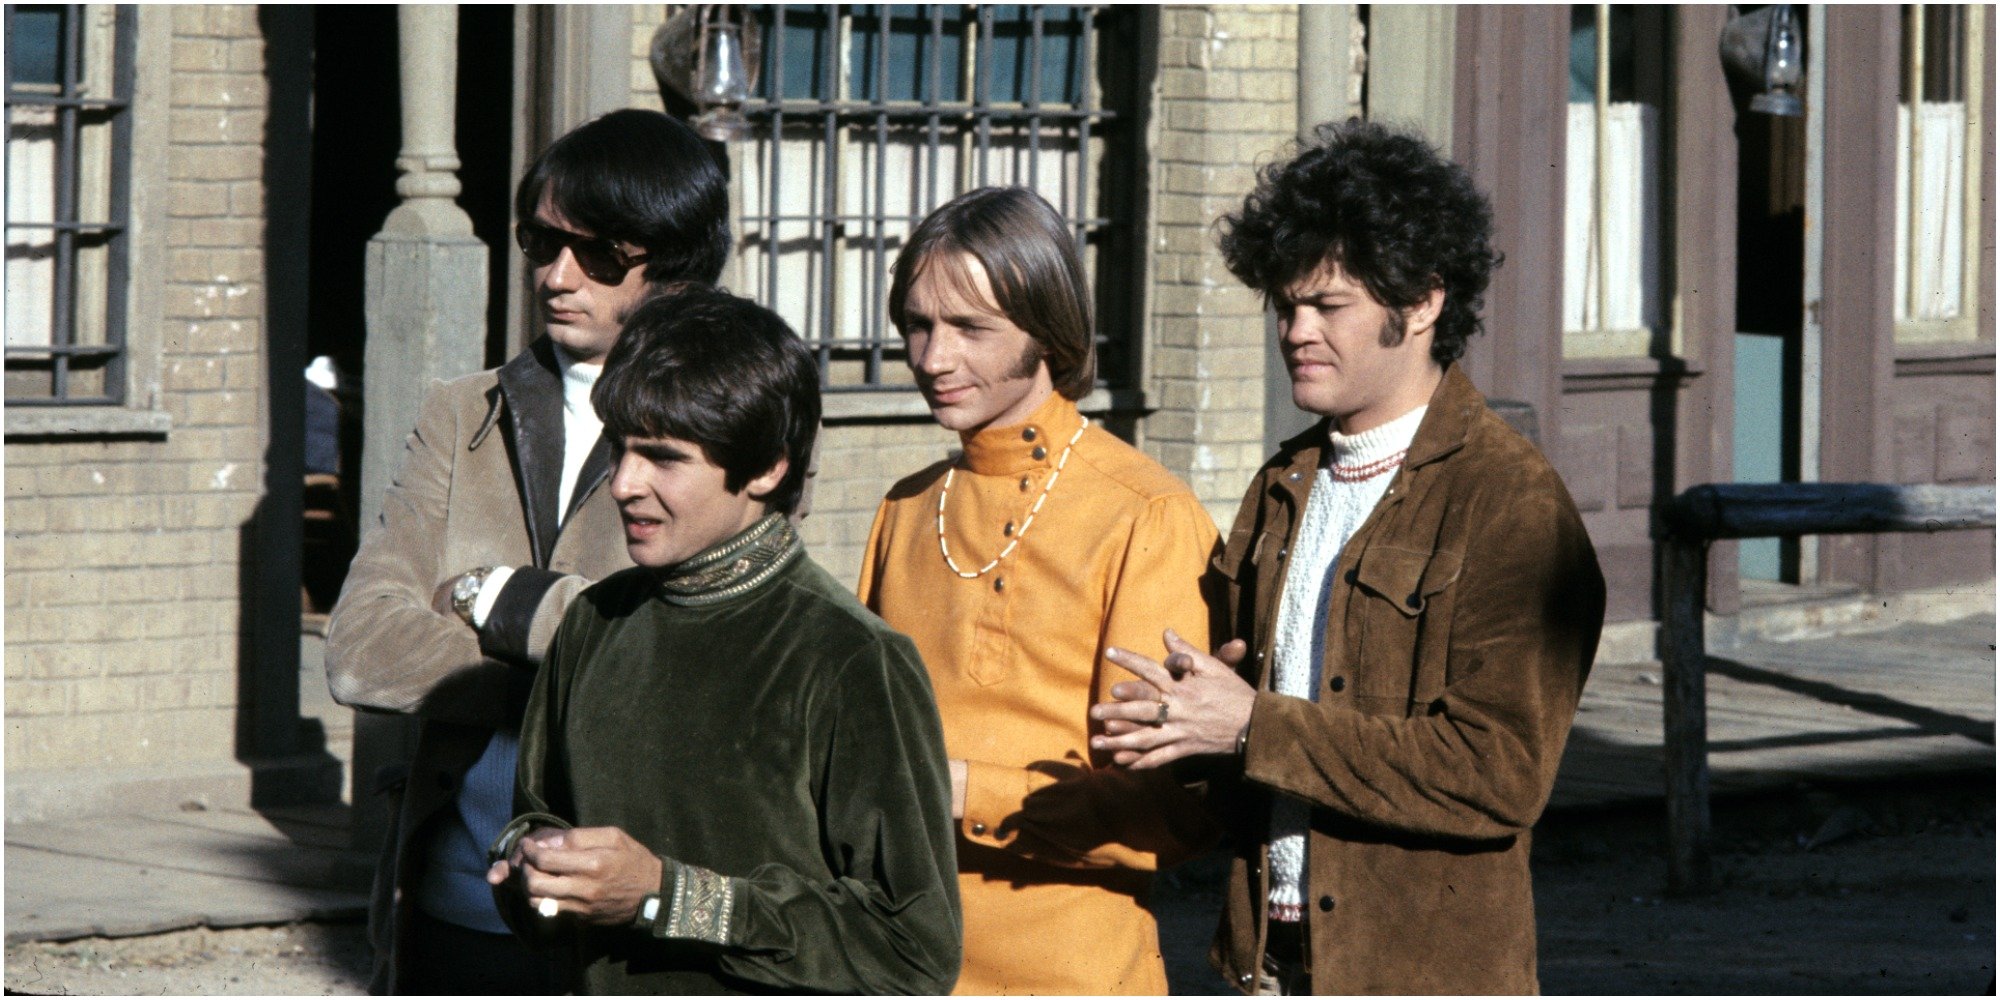 The Monkees on the set of their television show in 1968.